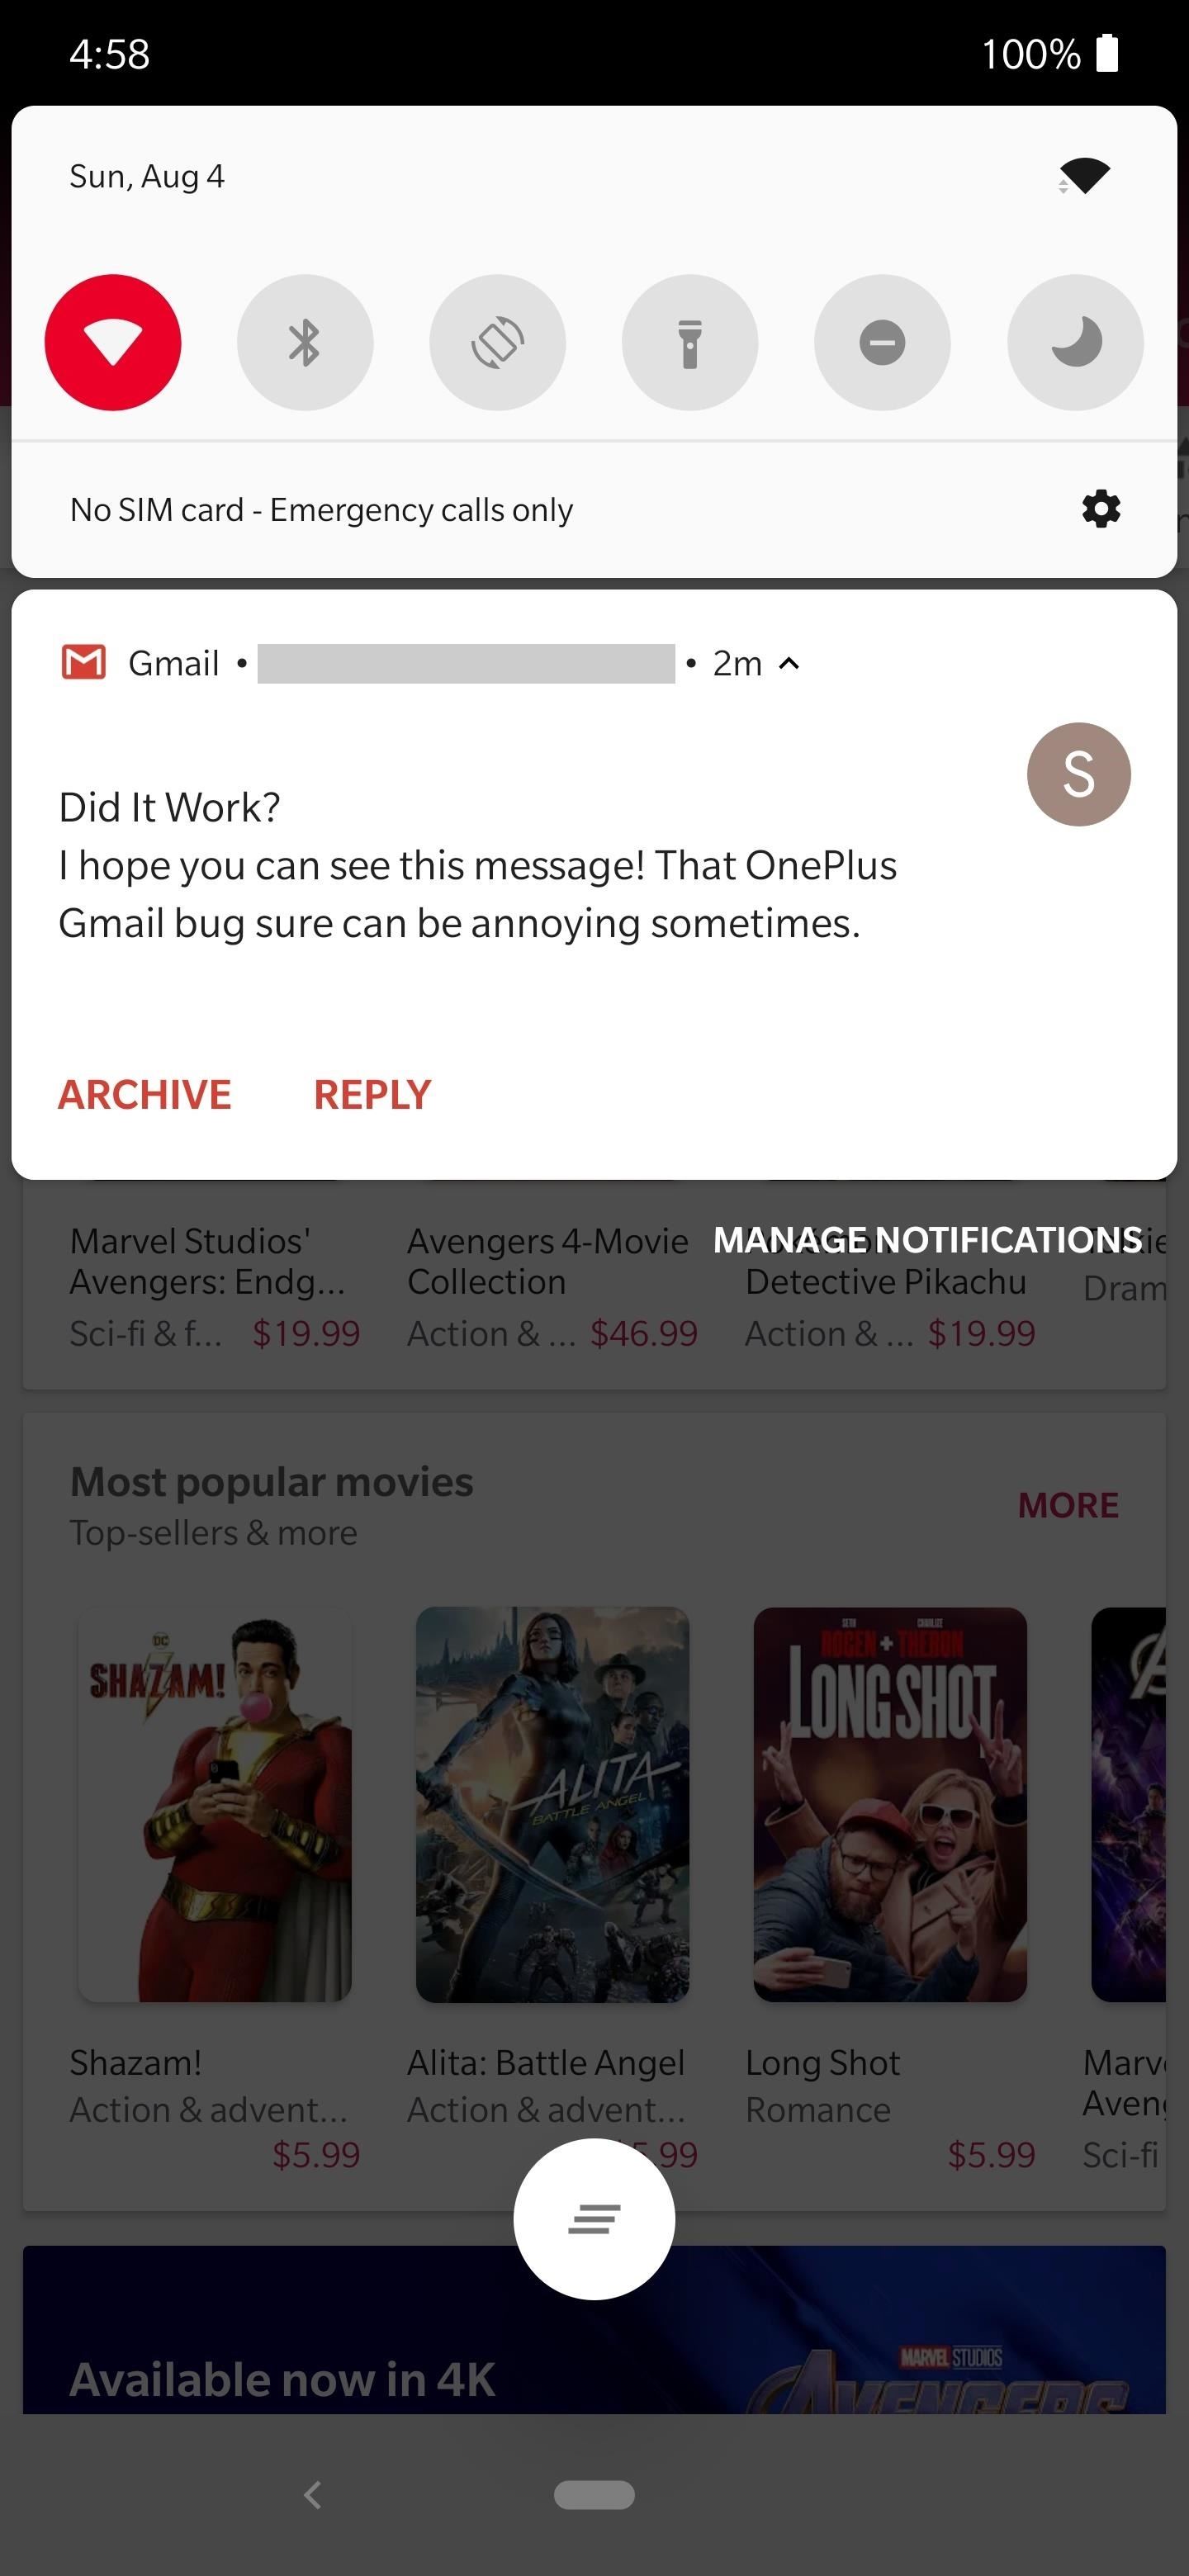 Getting Delayed Gmail Notifications on Your OnePlus? Here's the Fix